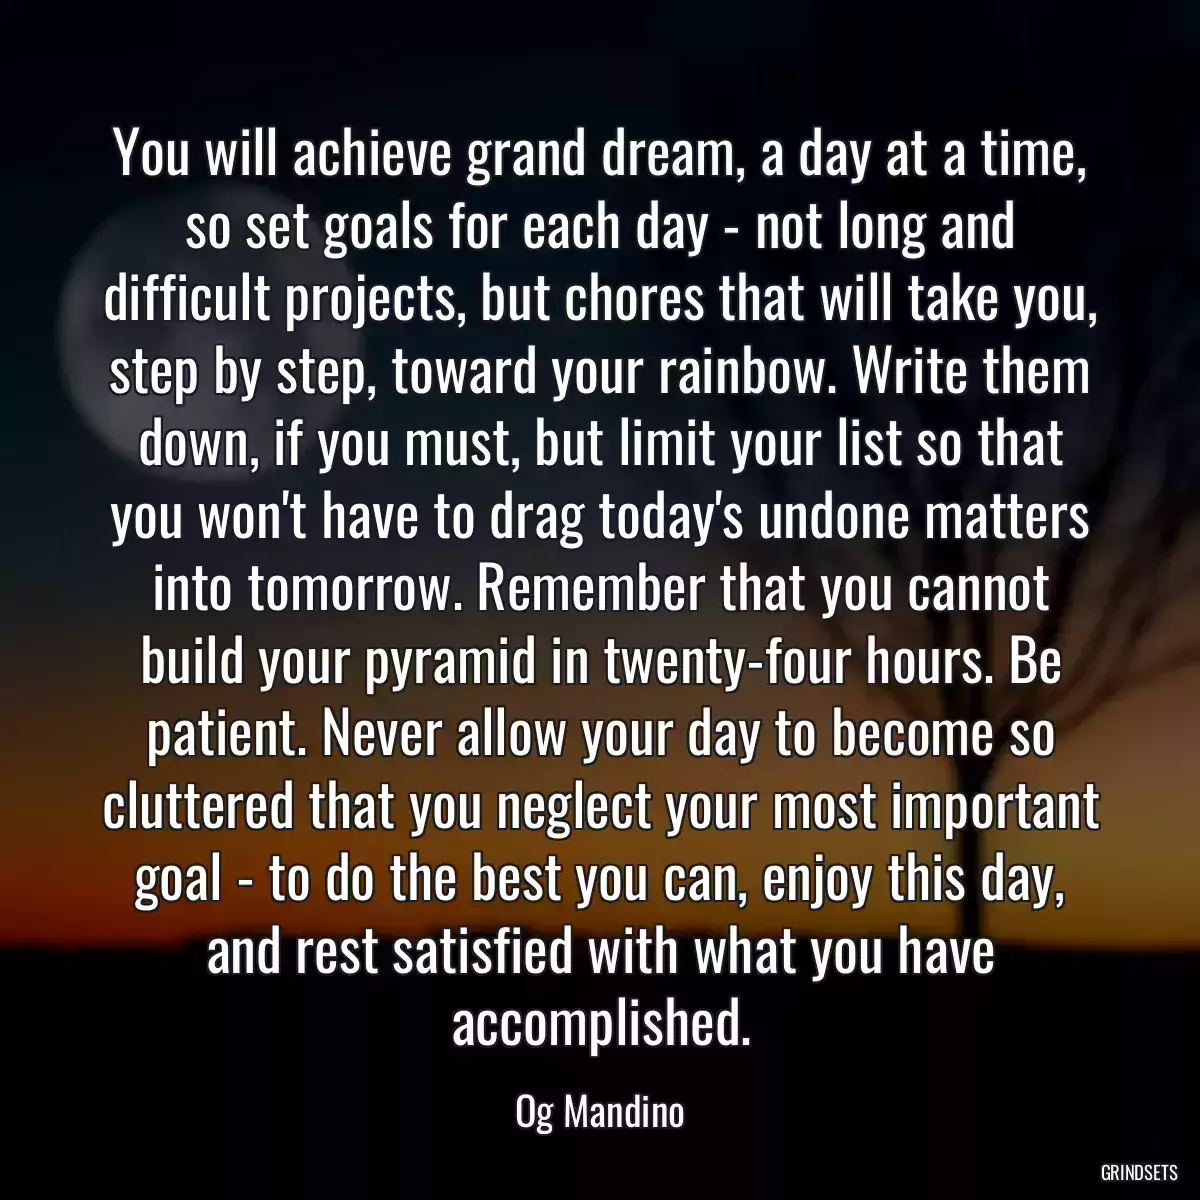 You will achieve grand dream, a day at a time, so set goals for each day - not long and difficult projects, but chores that will take you, step by step, toward your rainbow. Write them down, if you must, but limit your list so that you won\'t have to drag today\'s undone matters into tomorrow. Remember that you cannot build your pyramid in twenty-four hours. Be patient. Never allow your day to become so cluttered that you neglect your most important goal - to do the best you can, enjoy this day, and rest satisfied with what you have accomplished.